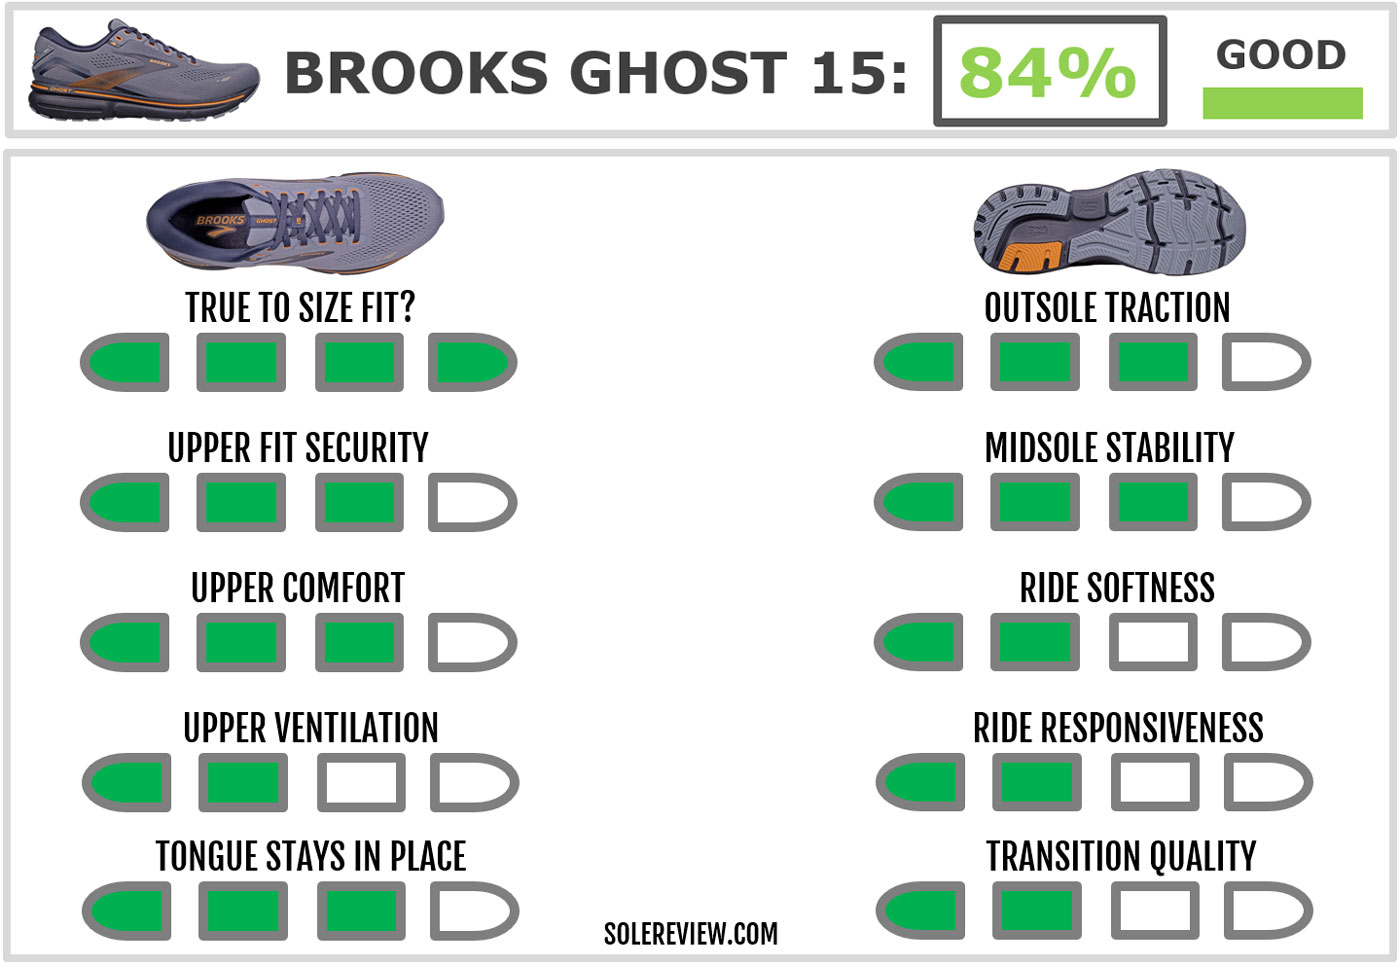 The overall score of the Brooks Ghost 15.